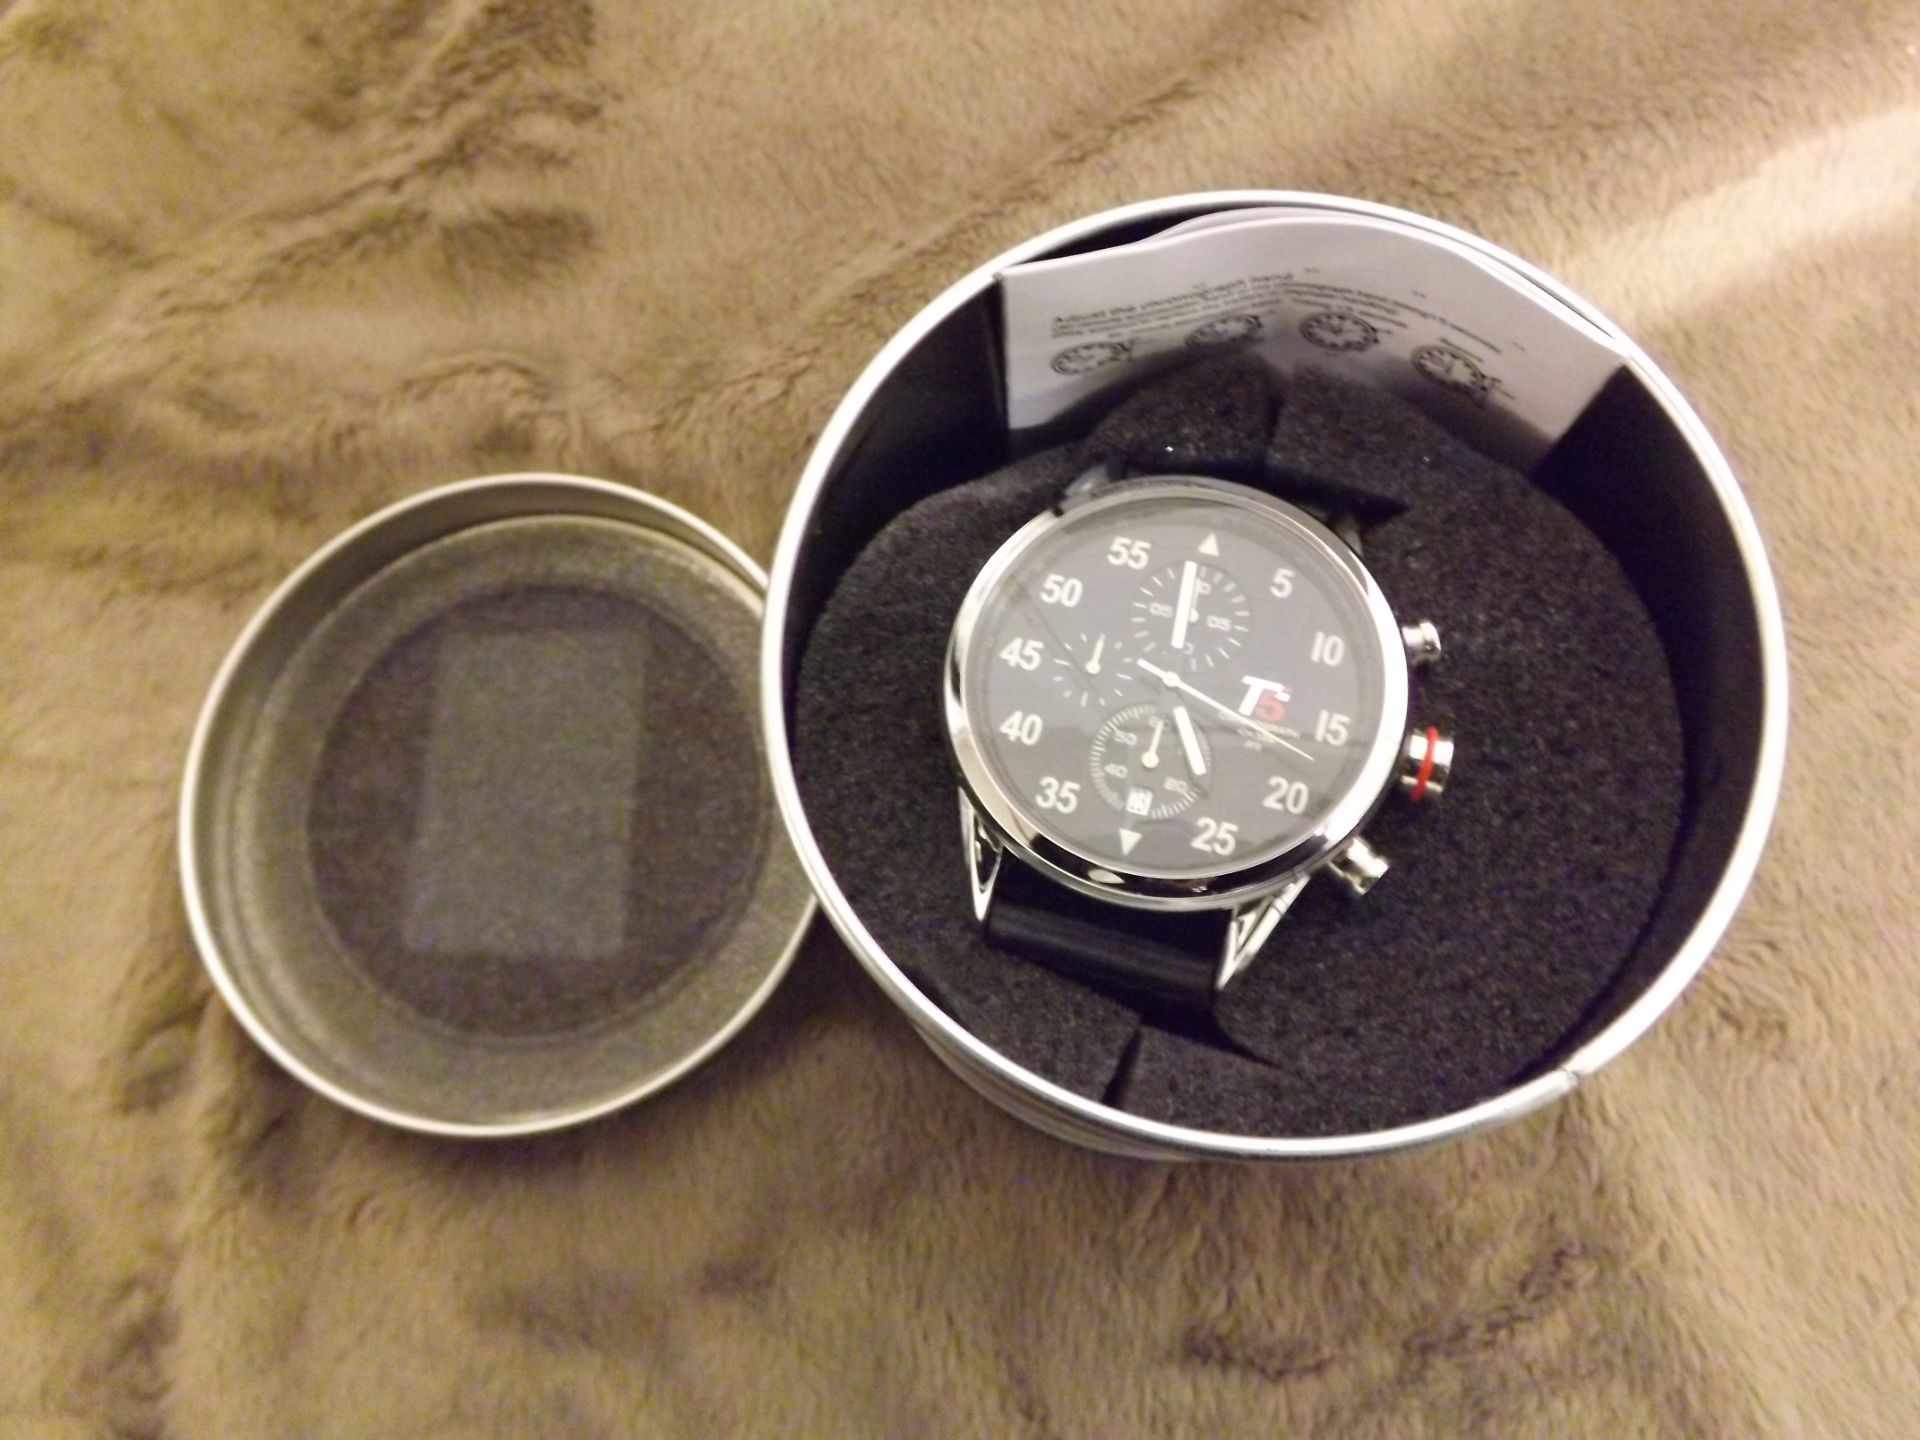 1 BRAND NEW BOXED T5 PILOT P1 GENTS CHRONOGRAPH WATCH RRP £449